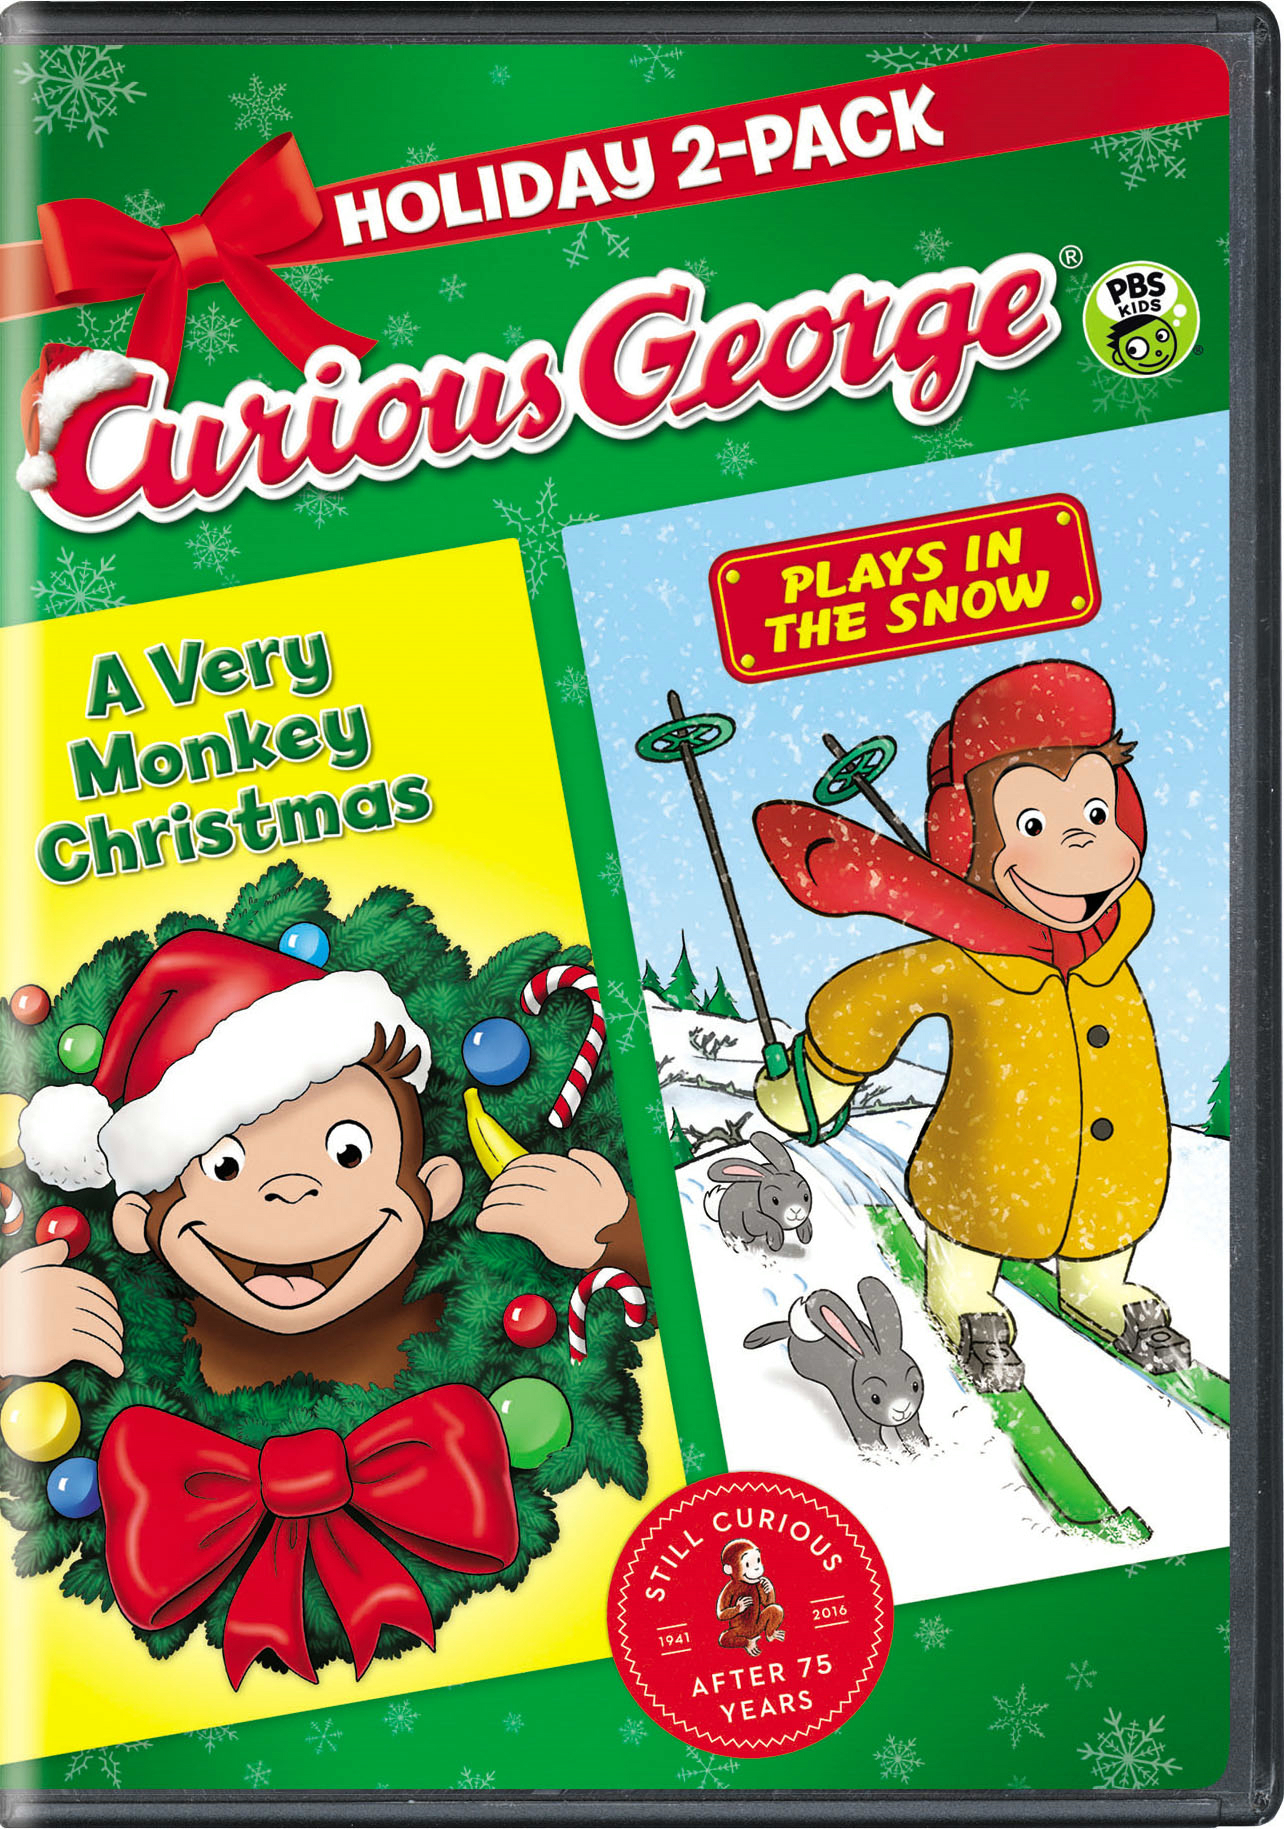 Curious George: A Very Monkey Christmas/Plays In The Snow (DVD Double Feature) - DVD   - Children Movies On DVD - Movies On GRUV